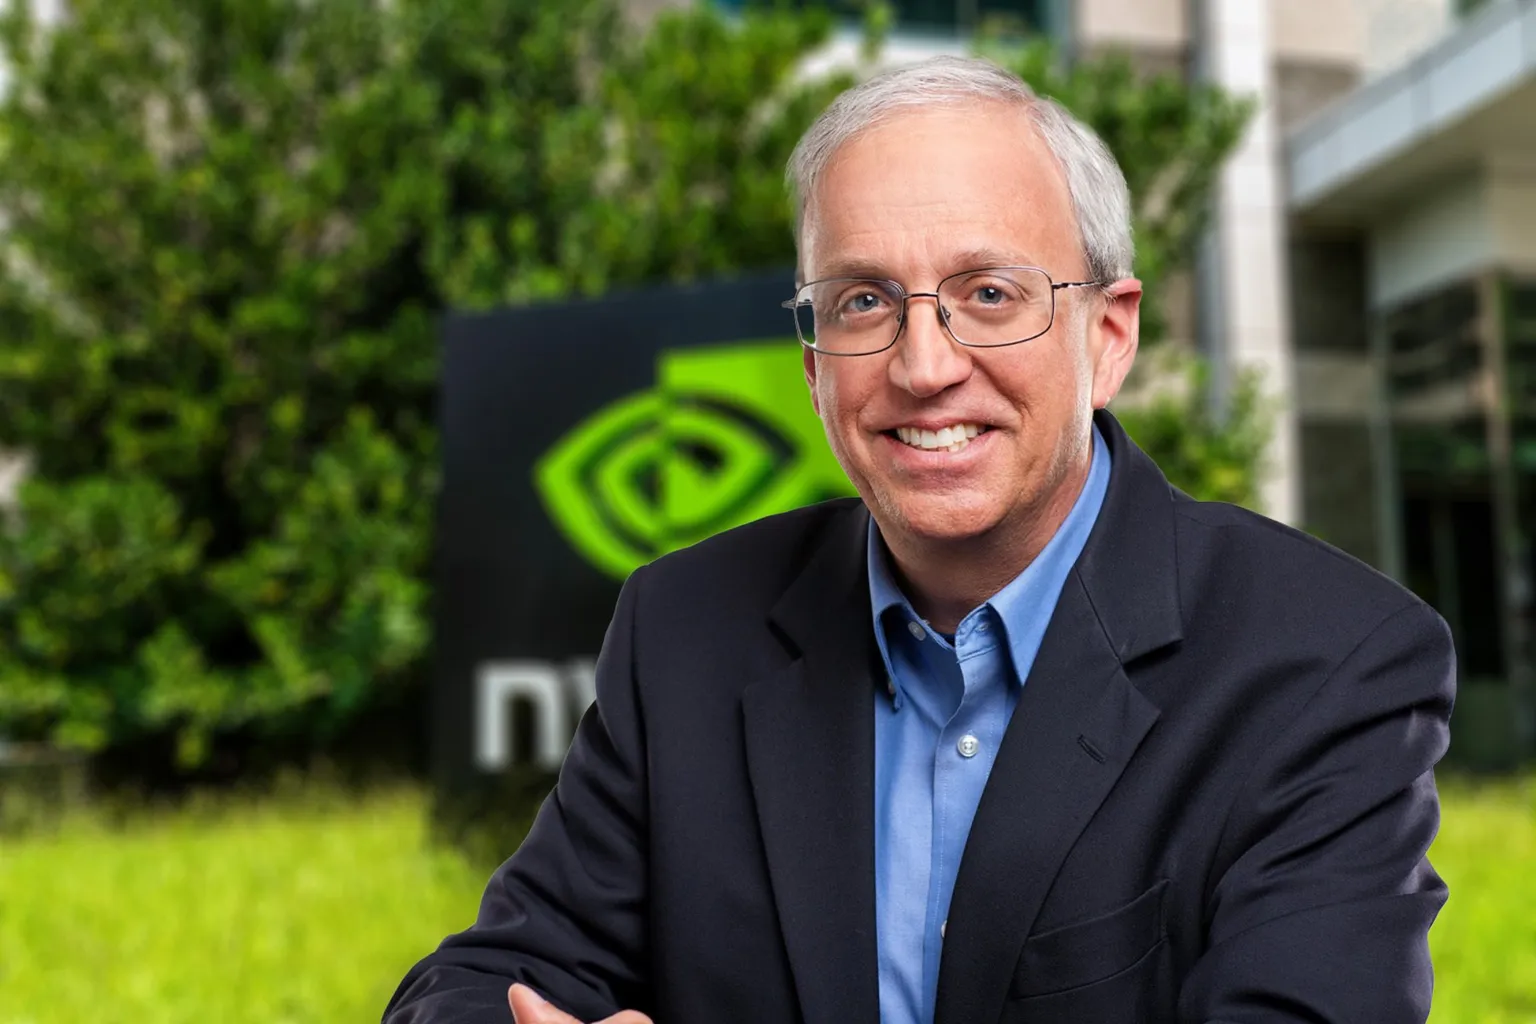 NVIDIA Chief Scientist William Dally. Images: NVIDIA/Jack Hong/Shutterstock